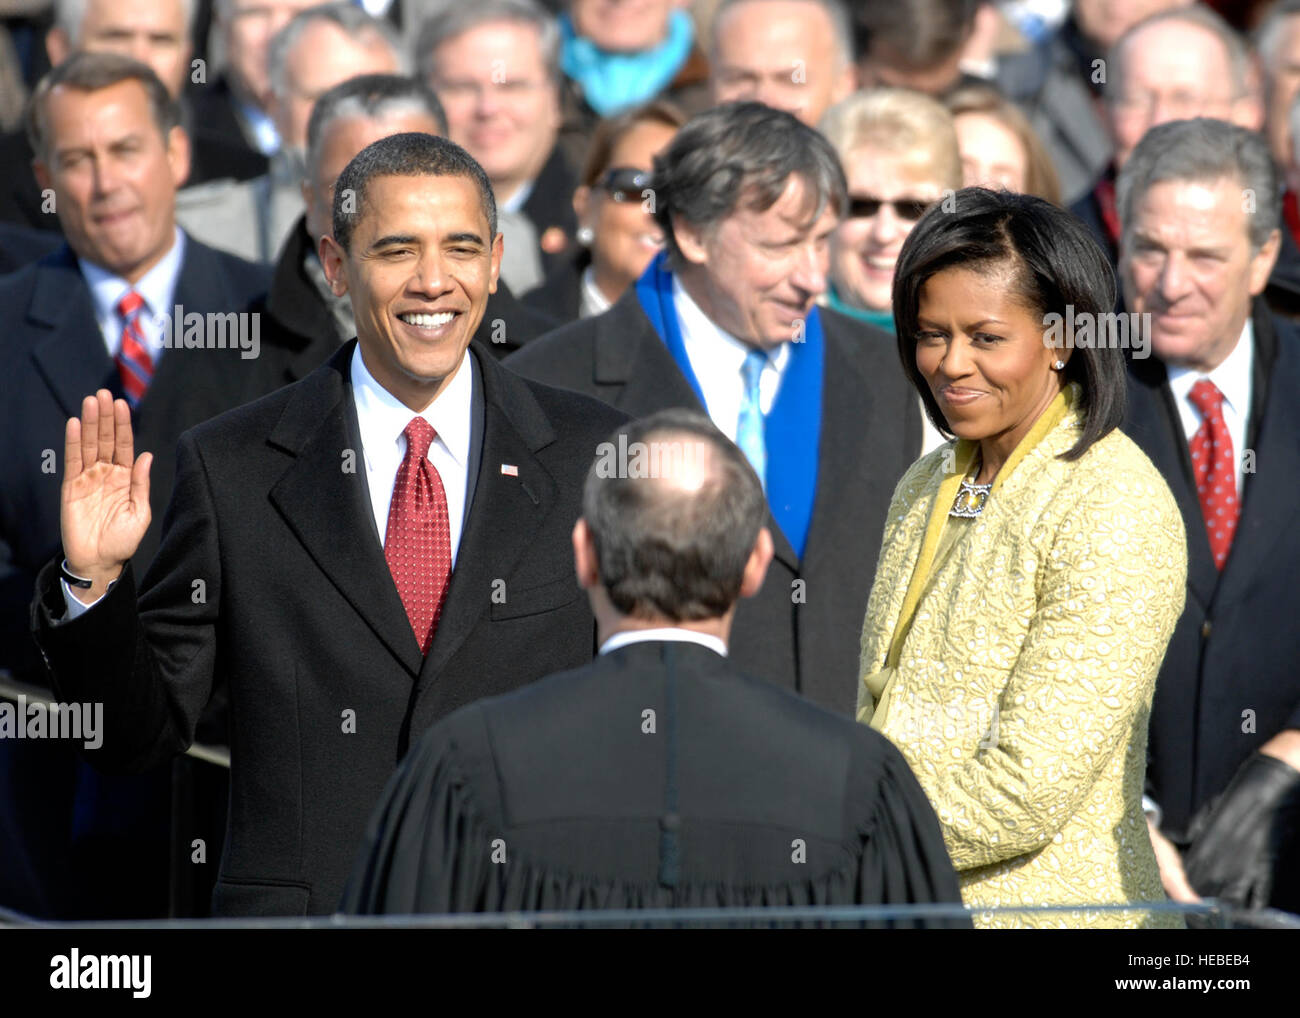 With his family by his side, Barack Obama is sworn in as the 44th president of the United States by Chief Justice of the United States John G. Roberts Jr. in Washington, D.C., Jan. 20, 2009.  More than 5,000 men and women in uniform are providing military ceremonial support to the presidential inauguration, a tradition dating back to George Washington's 1789 inauguration.  (DoD photo by Master Sgt. Cecilio Ricardo, U.S. Air Force/Released) Stock Photo